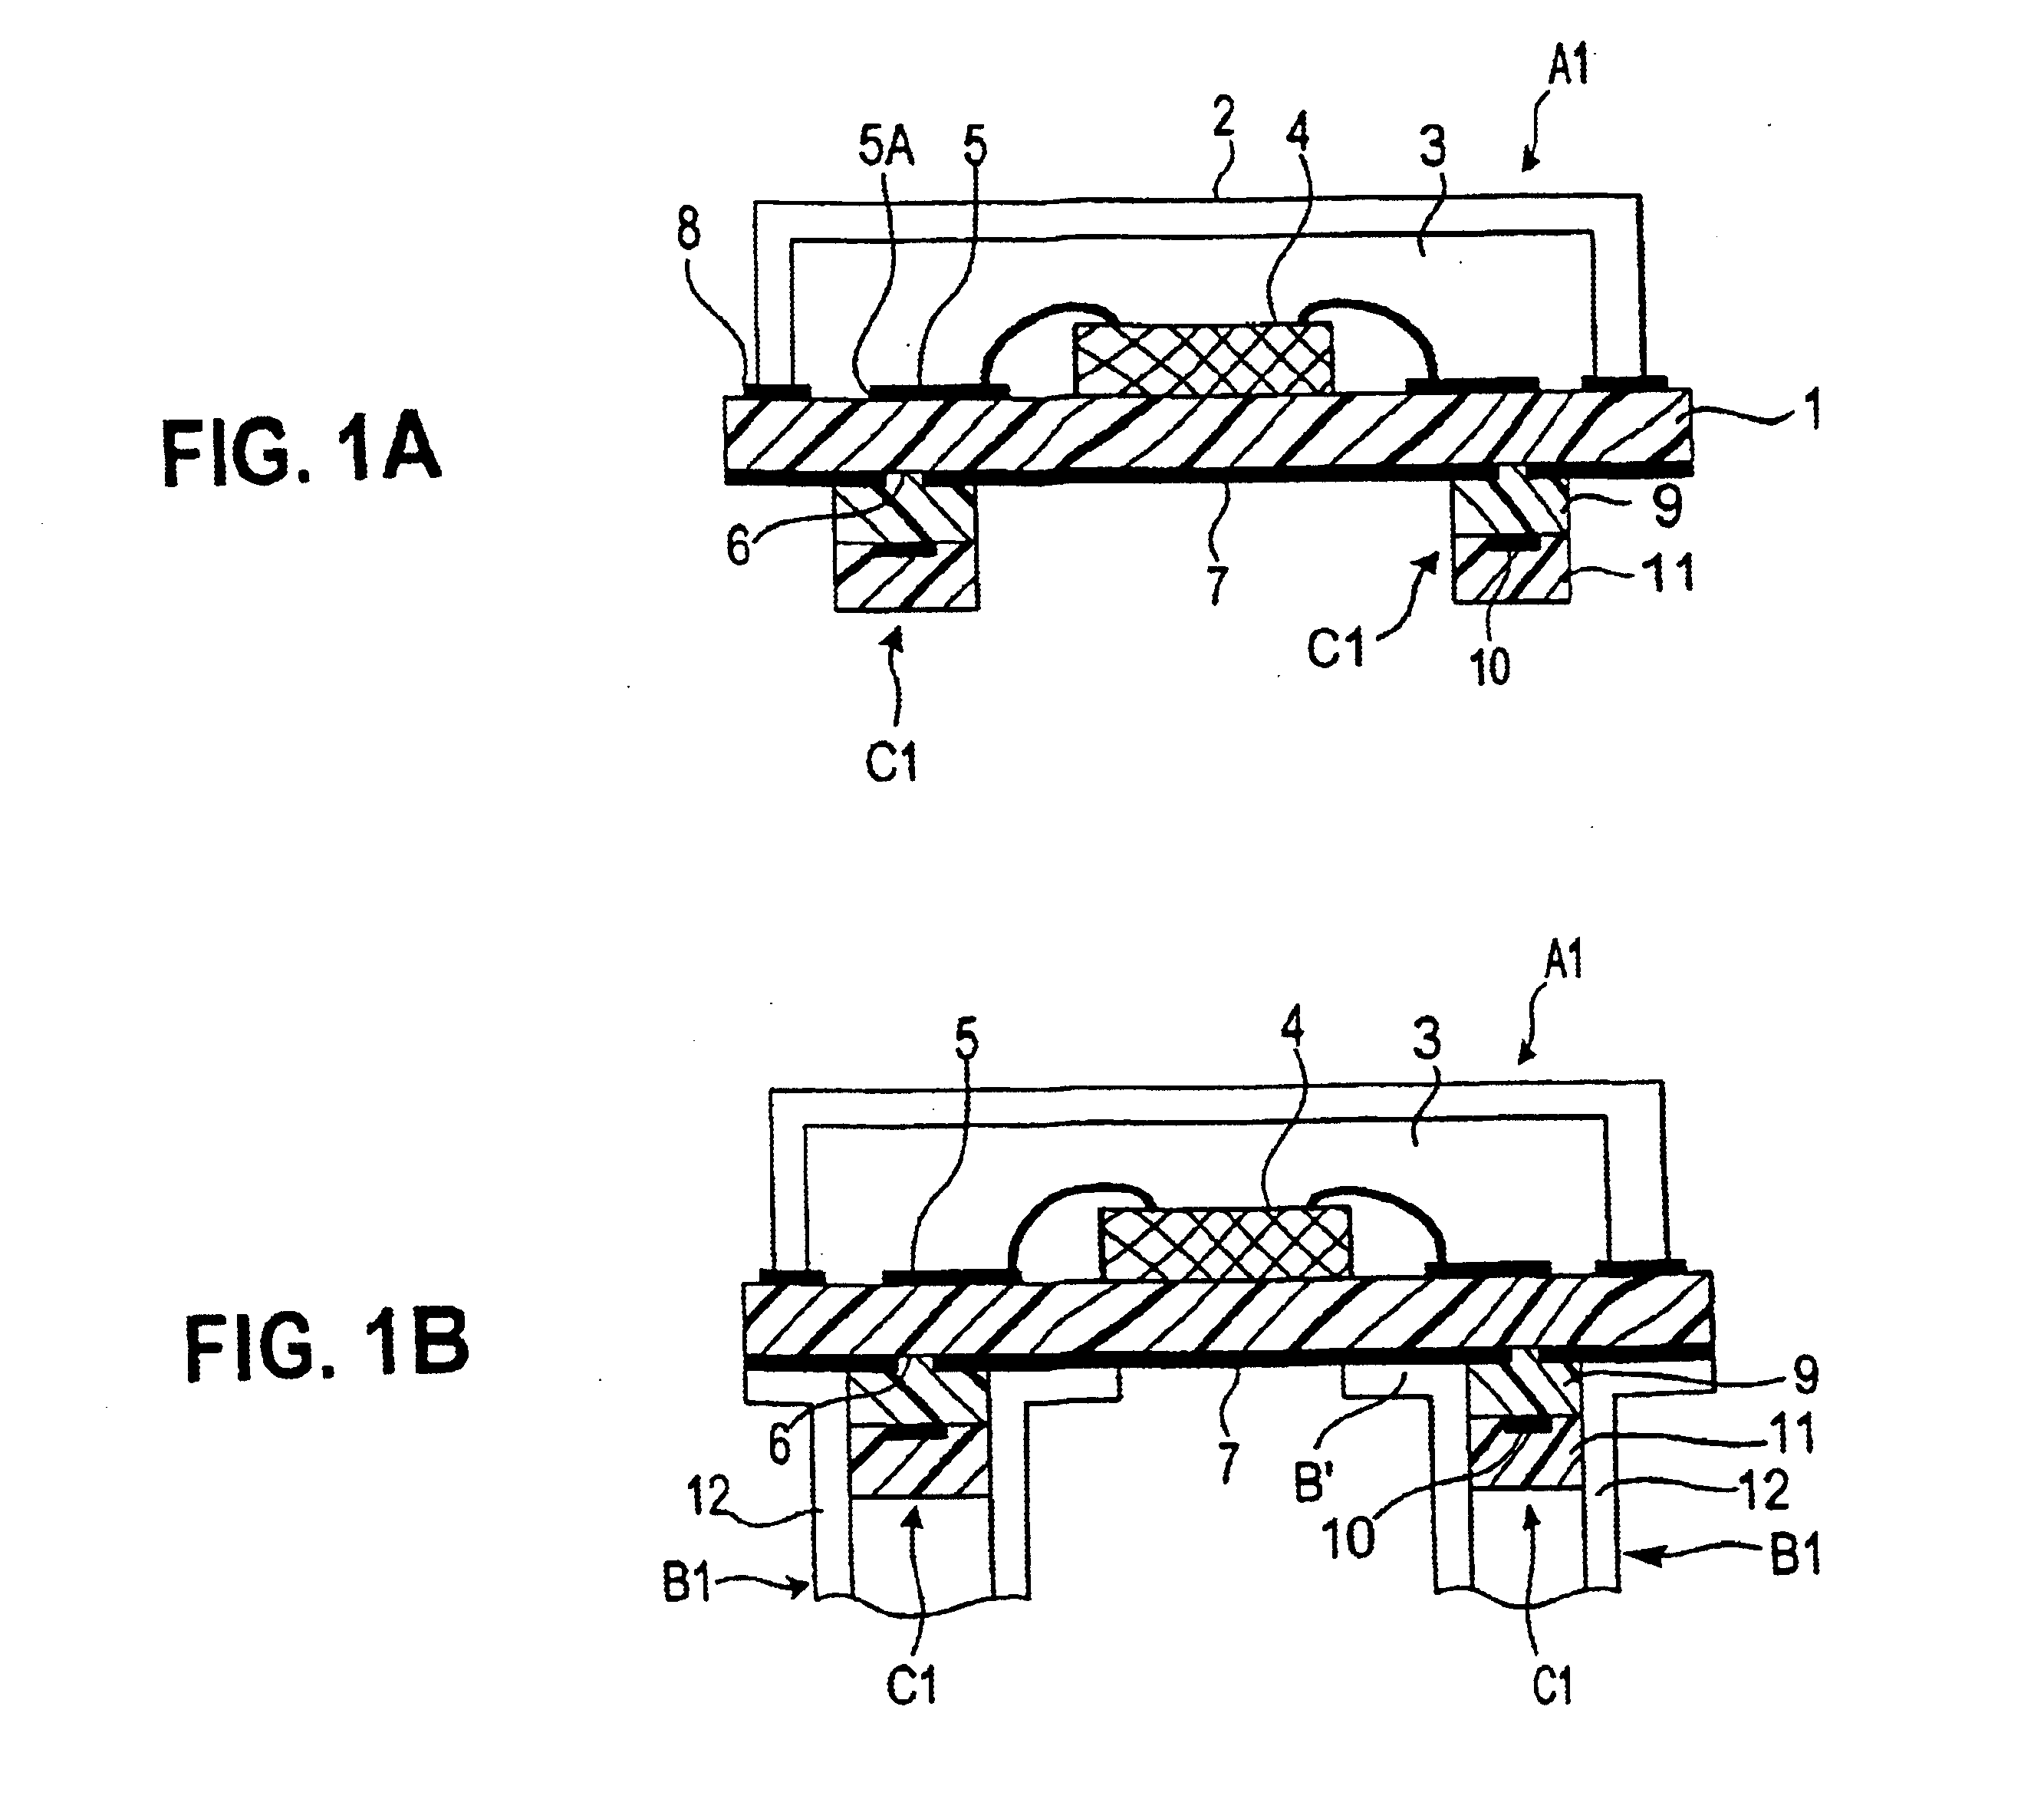 Multi-layered wiring board for slot coupling a transmission line to a waveguide